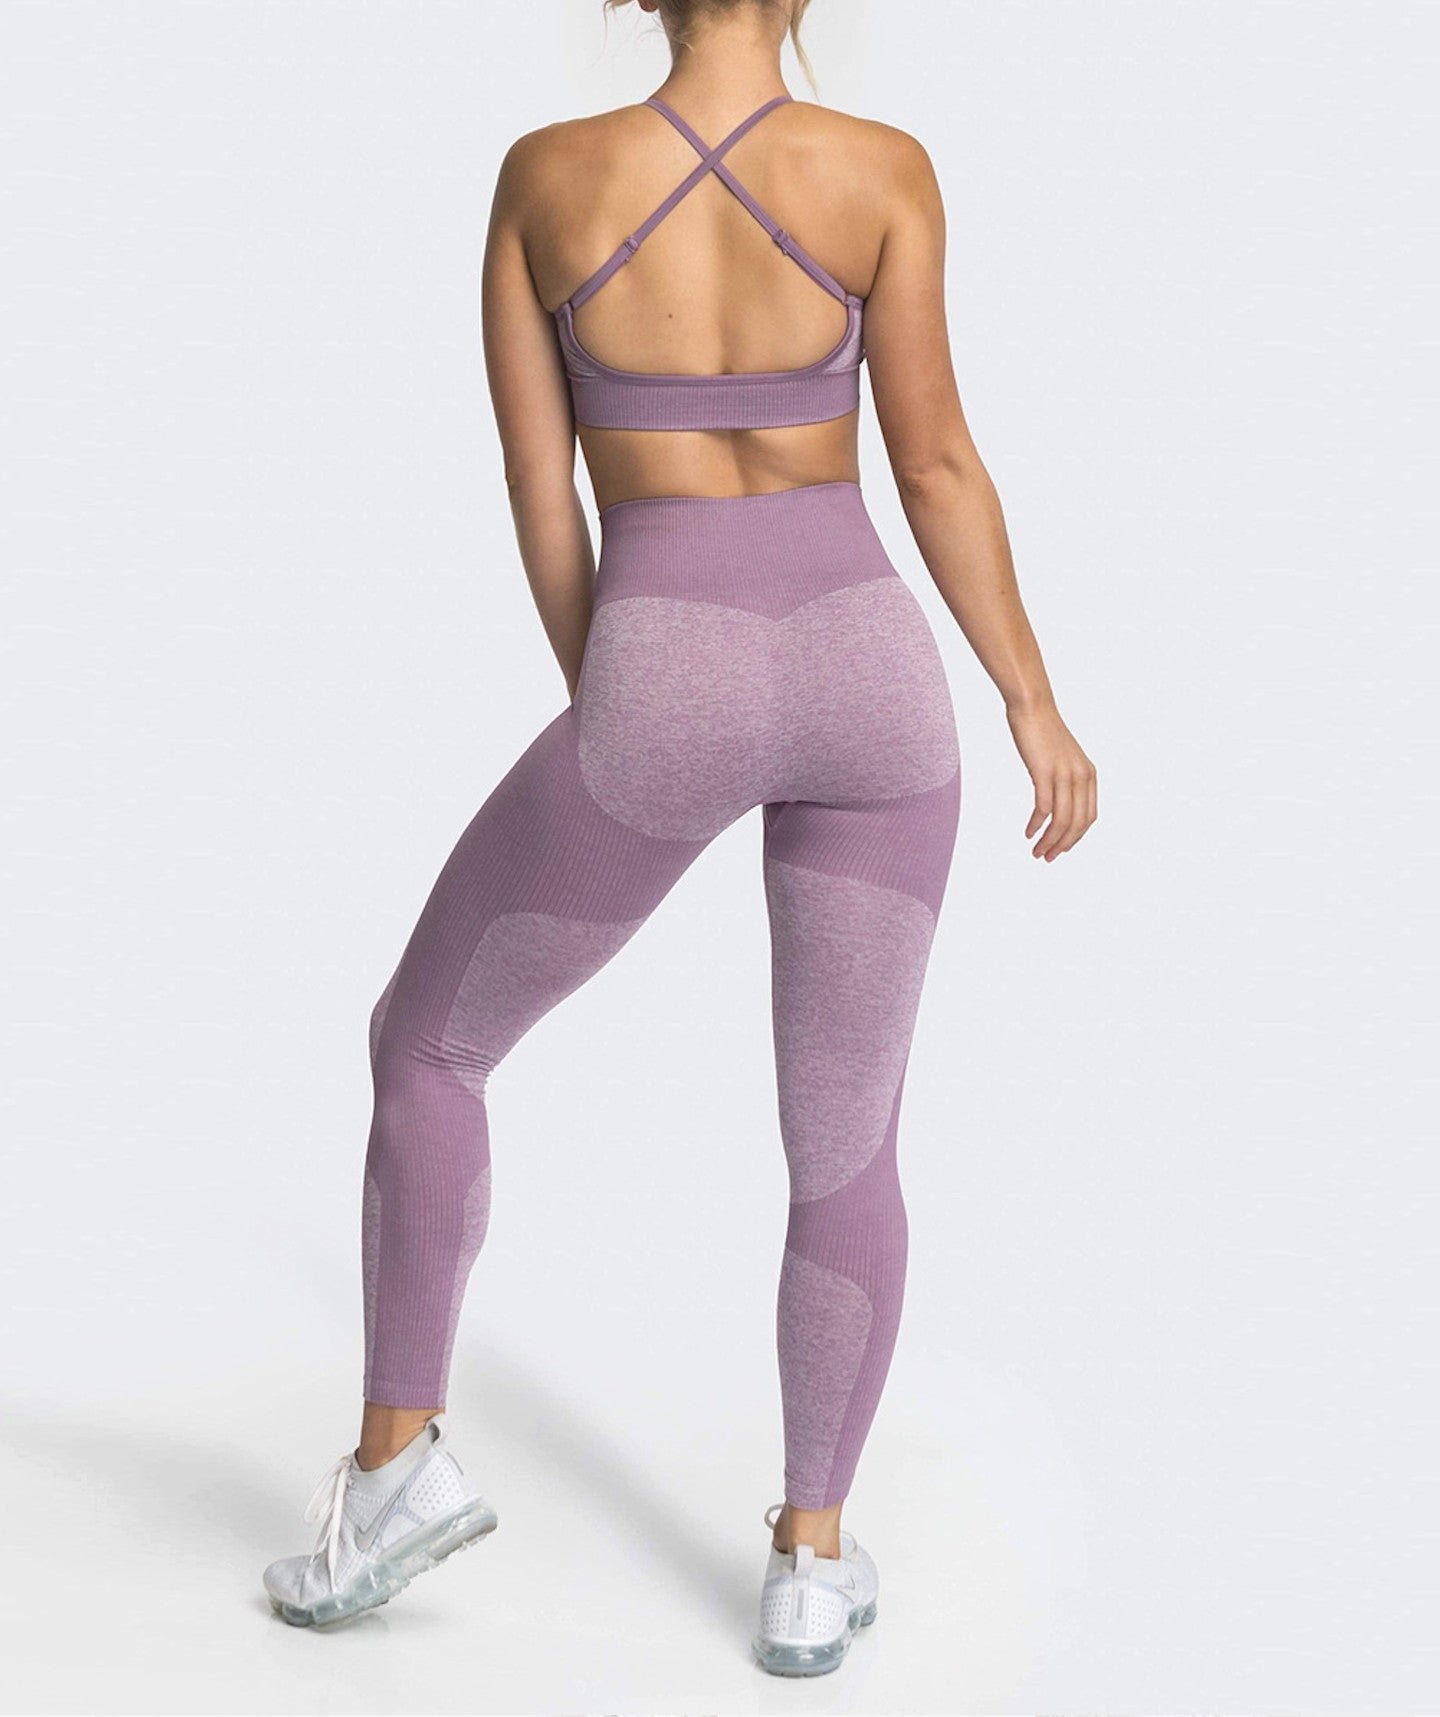 Flair Fitness Set Cross Back Sports BH med justerbare stropper i Mauve